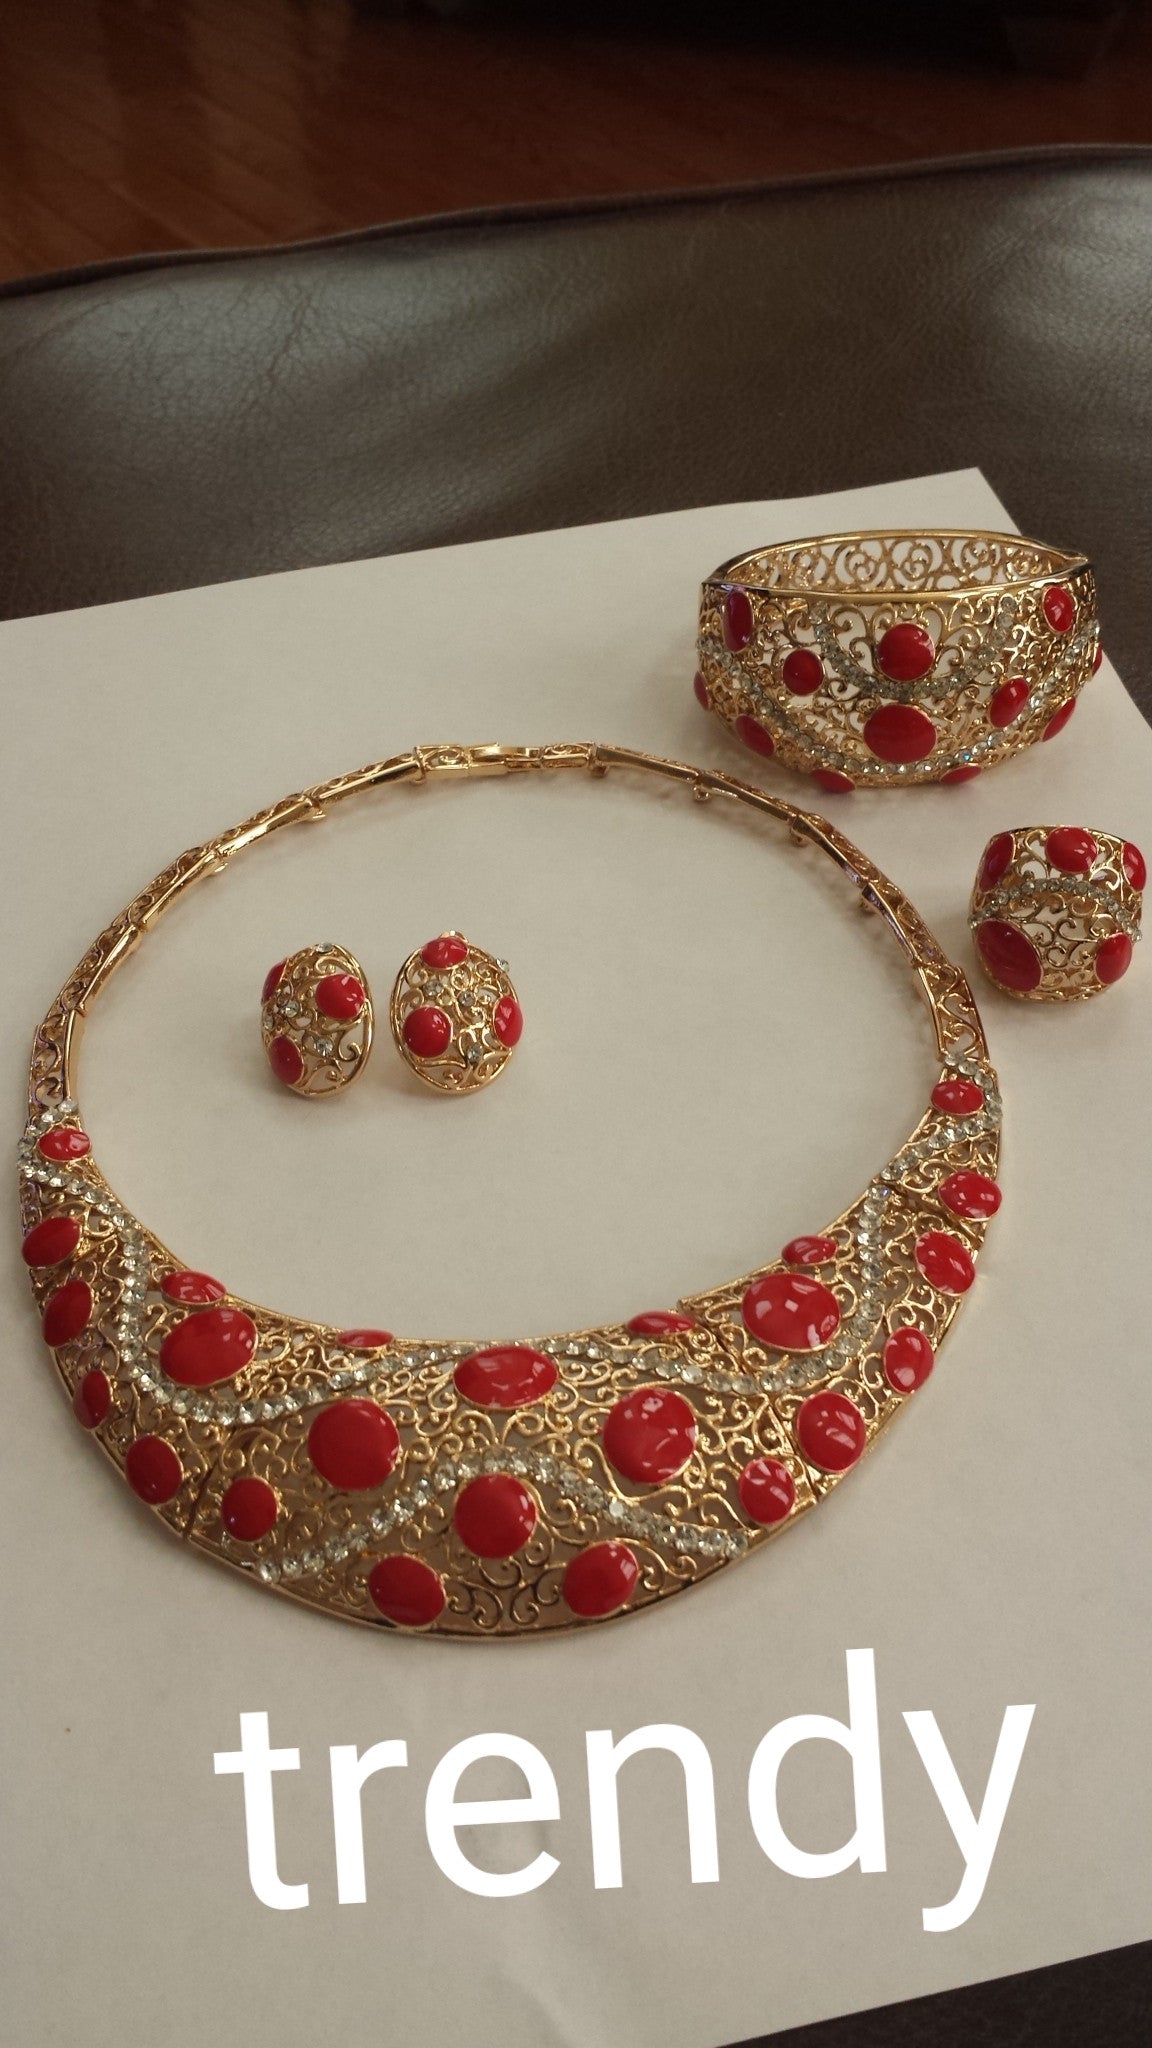 4pc omega necklace set.  18K gold plating with Red beads accent. Hypoallergenic quality